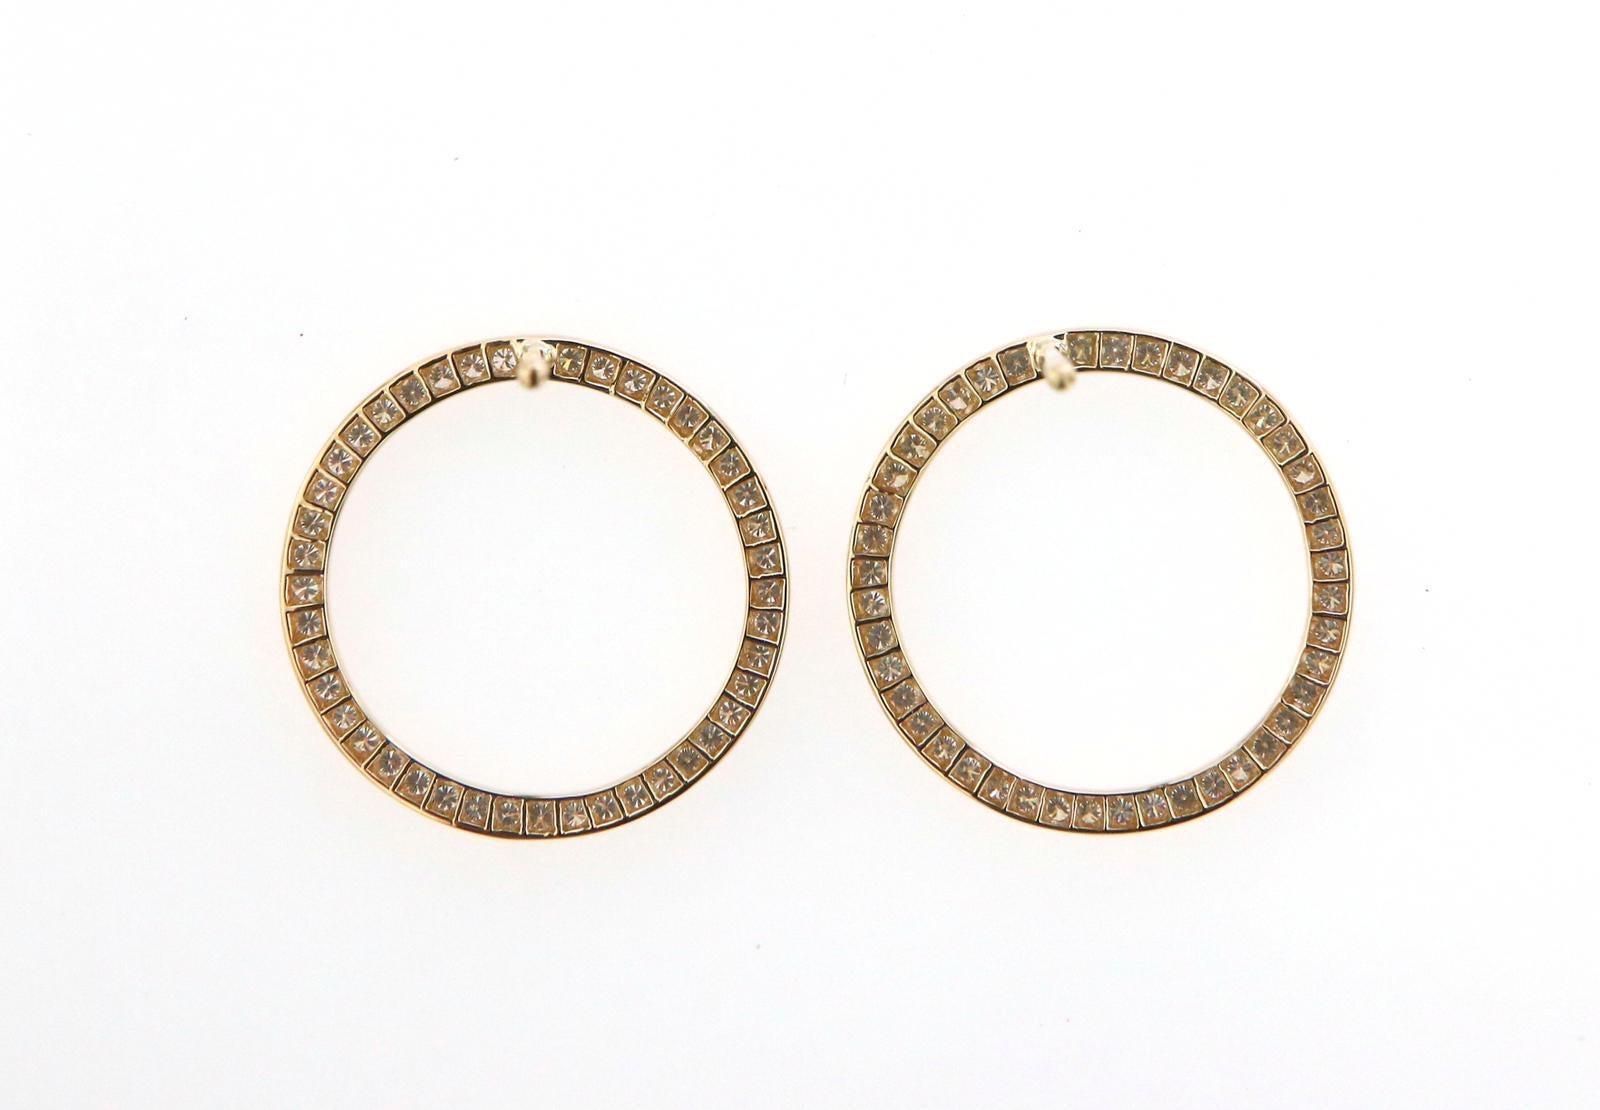 These fun and playful circle earrings are made from sparkling pav'ed diamonds. The VVS diamonds are set into the the circle design and are perfect for daily wear or dressed up for the evening. 